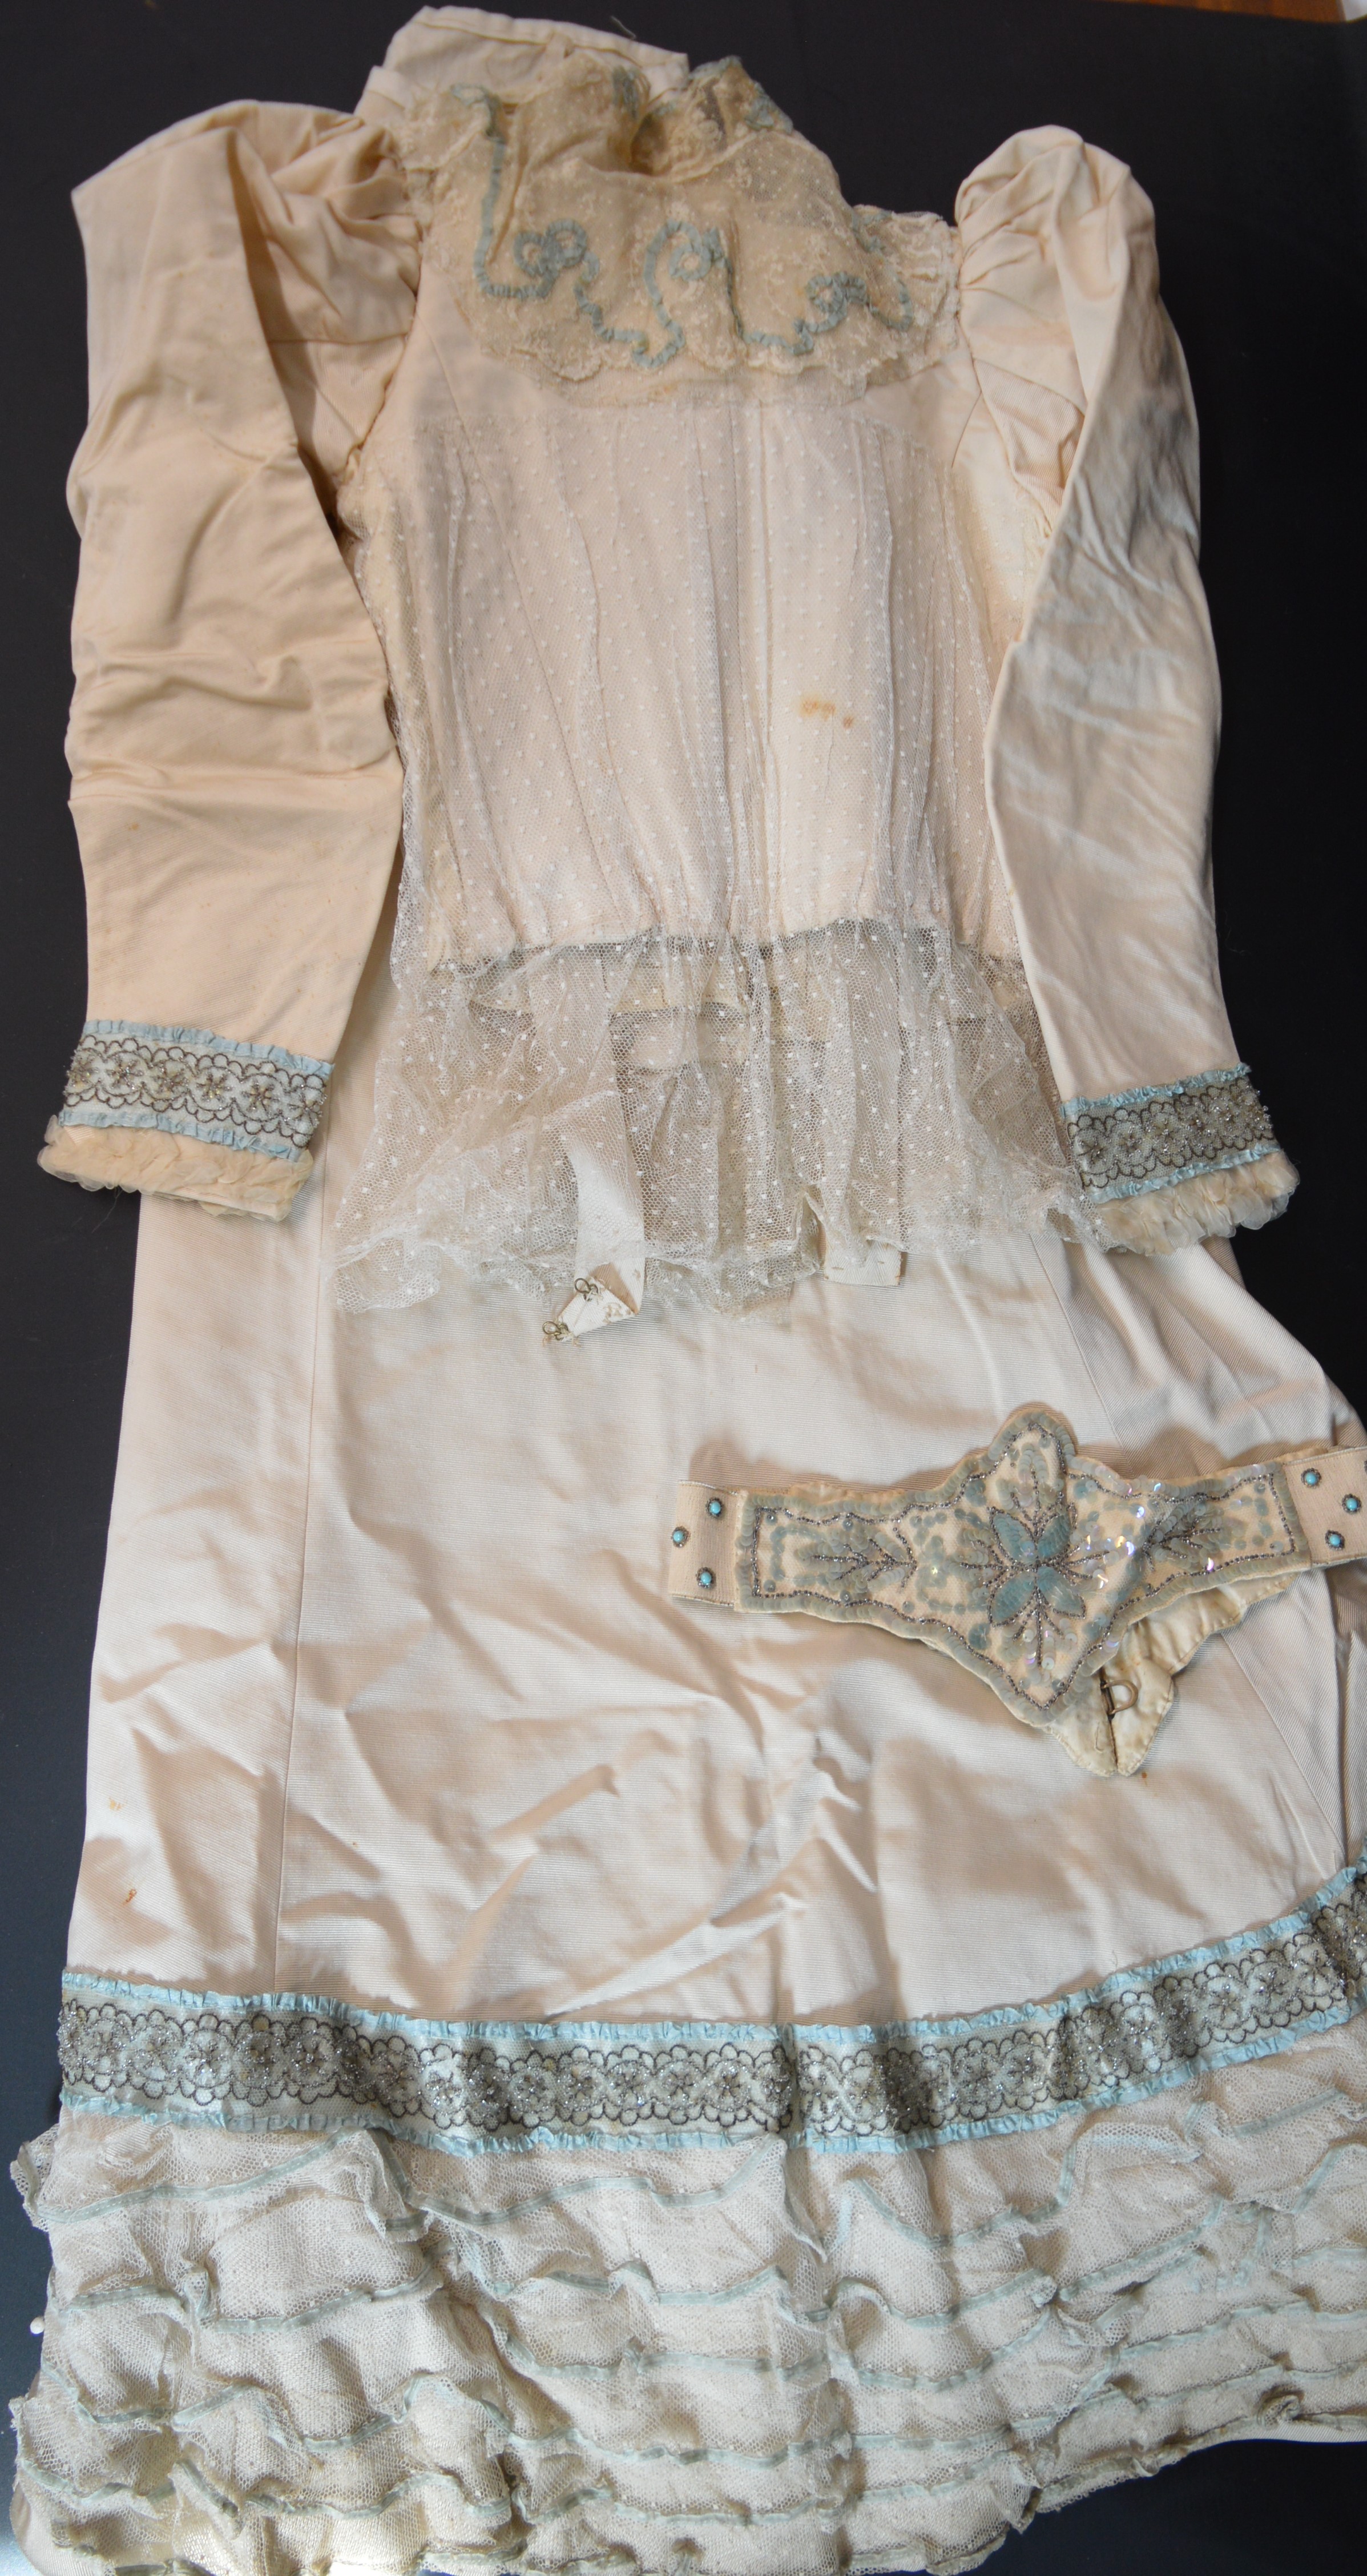 1897 hand made 2 piece wedding dress with veil, additional jacket, 1920s beaded dress & child's - Image 6 of 26